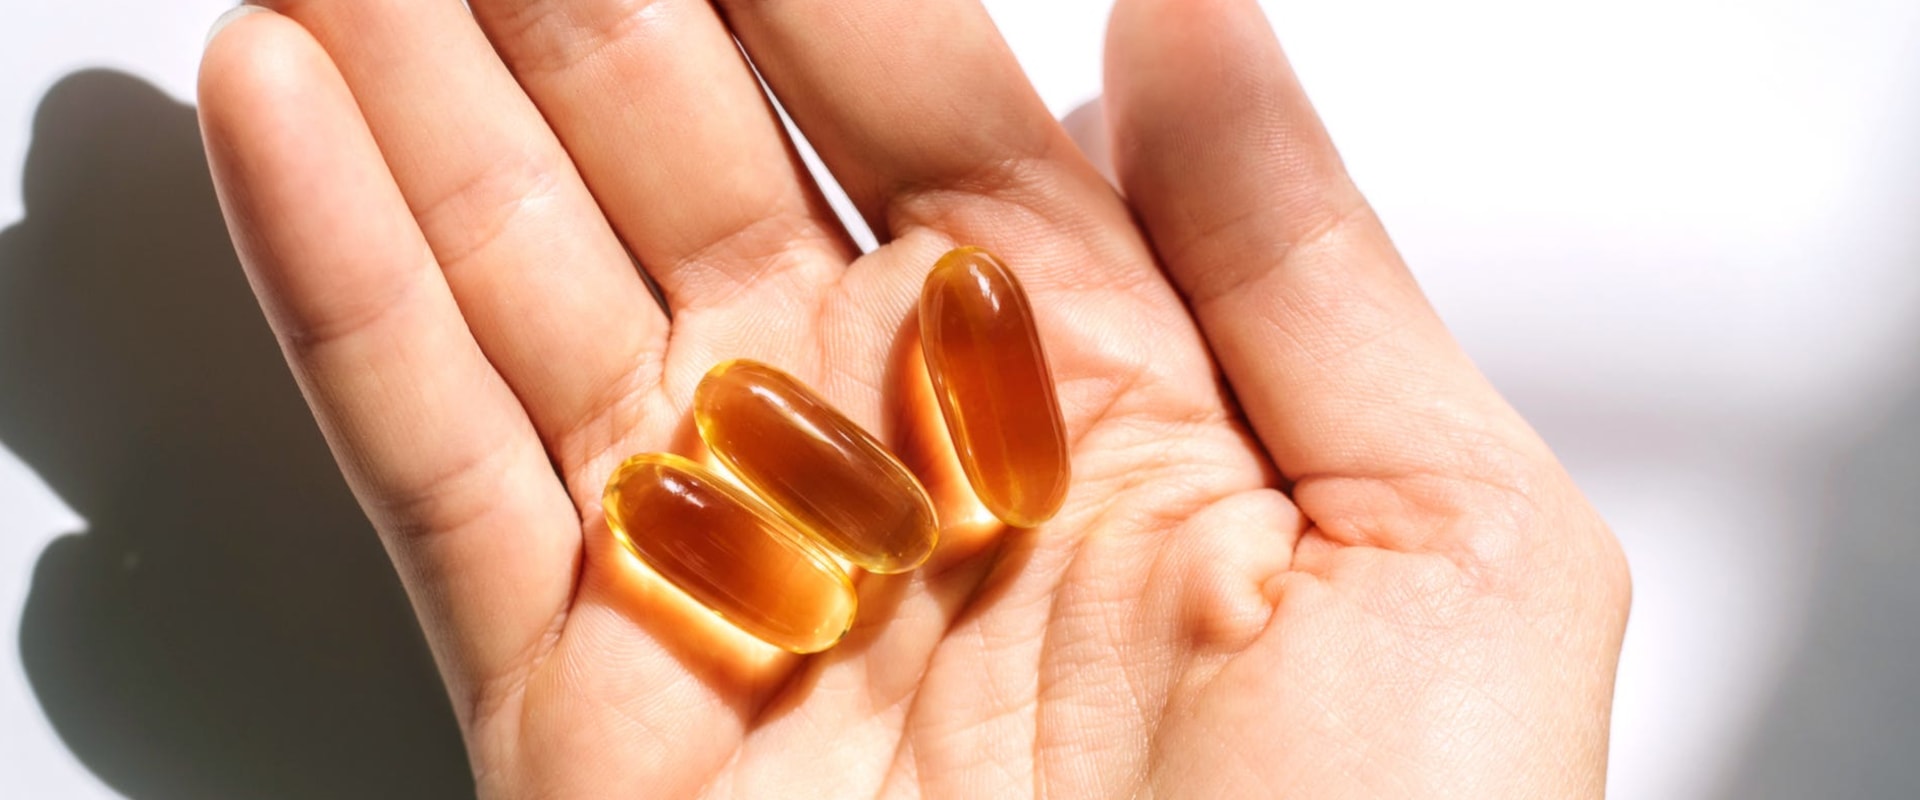 How to Store Anti-Aging Supplements for Maximum Effectiveness and Maximum Results